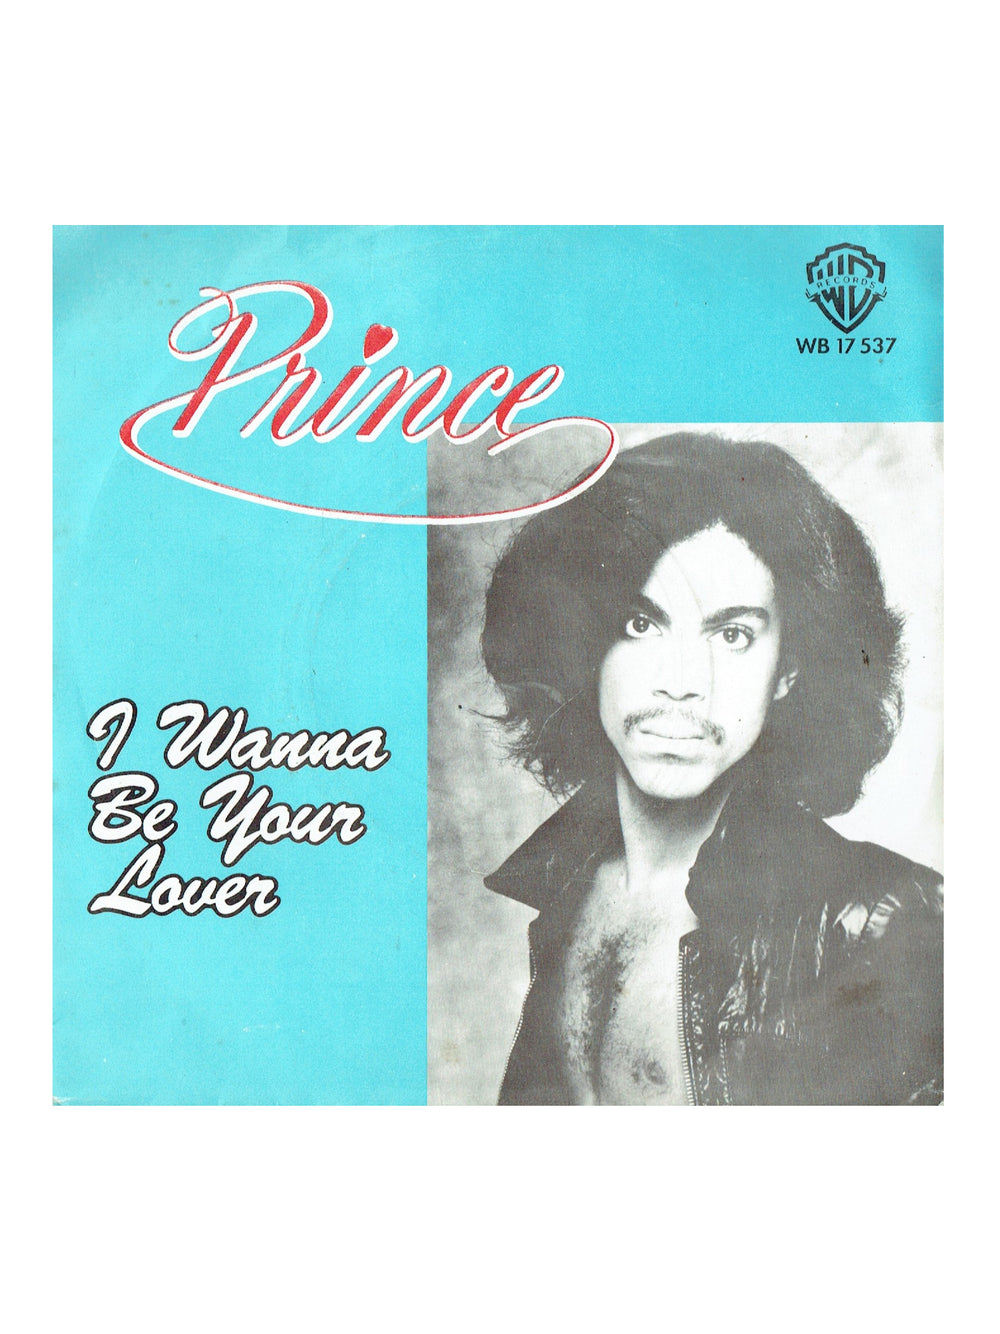 Prince – I Wanna Be Your Lover 7 Inch Vinyl Single Picture Sleeve WB 17 537